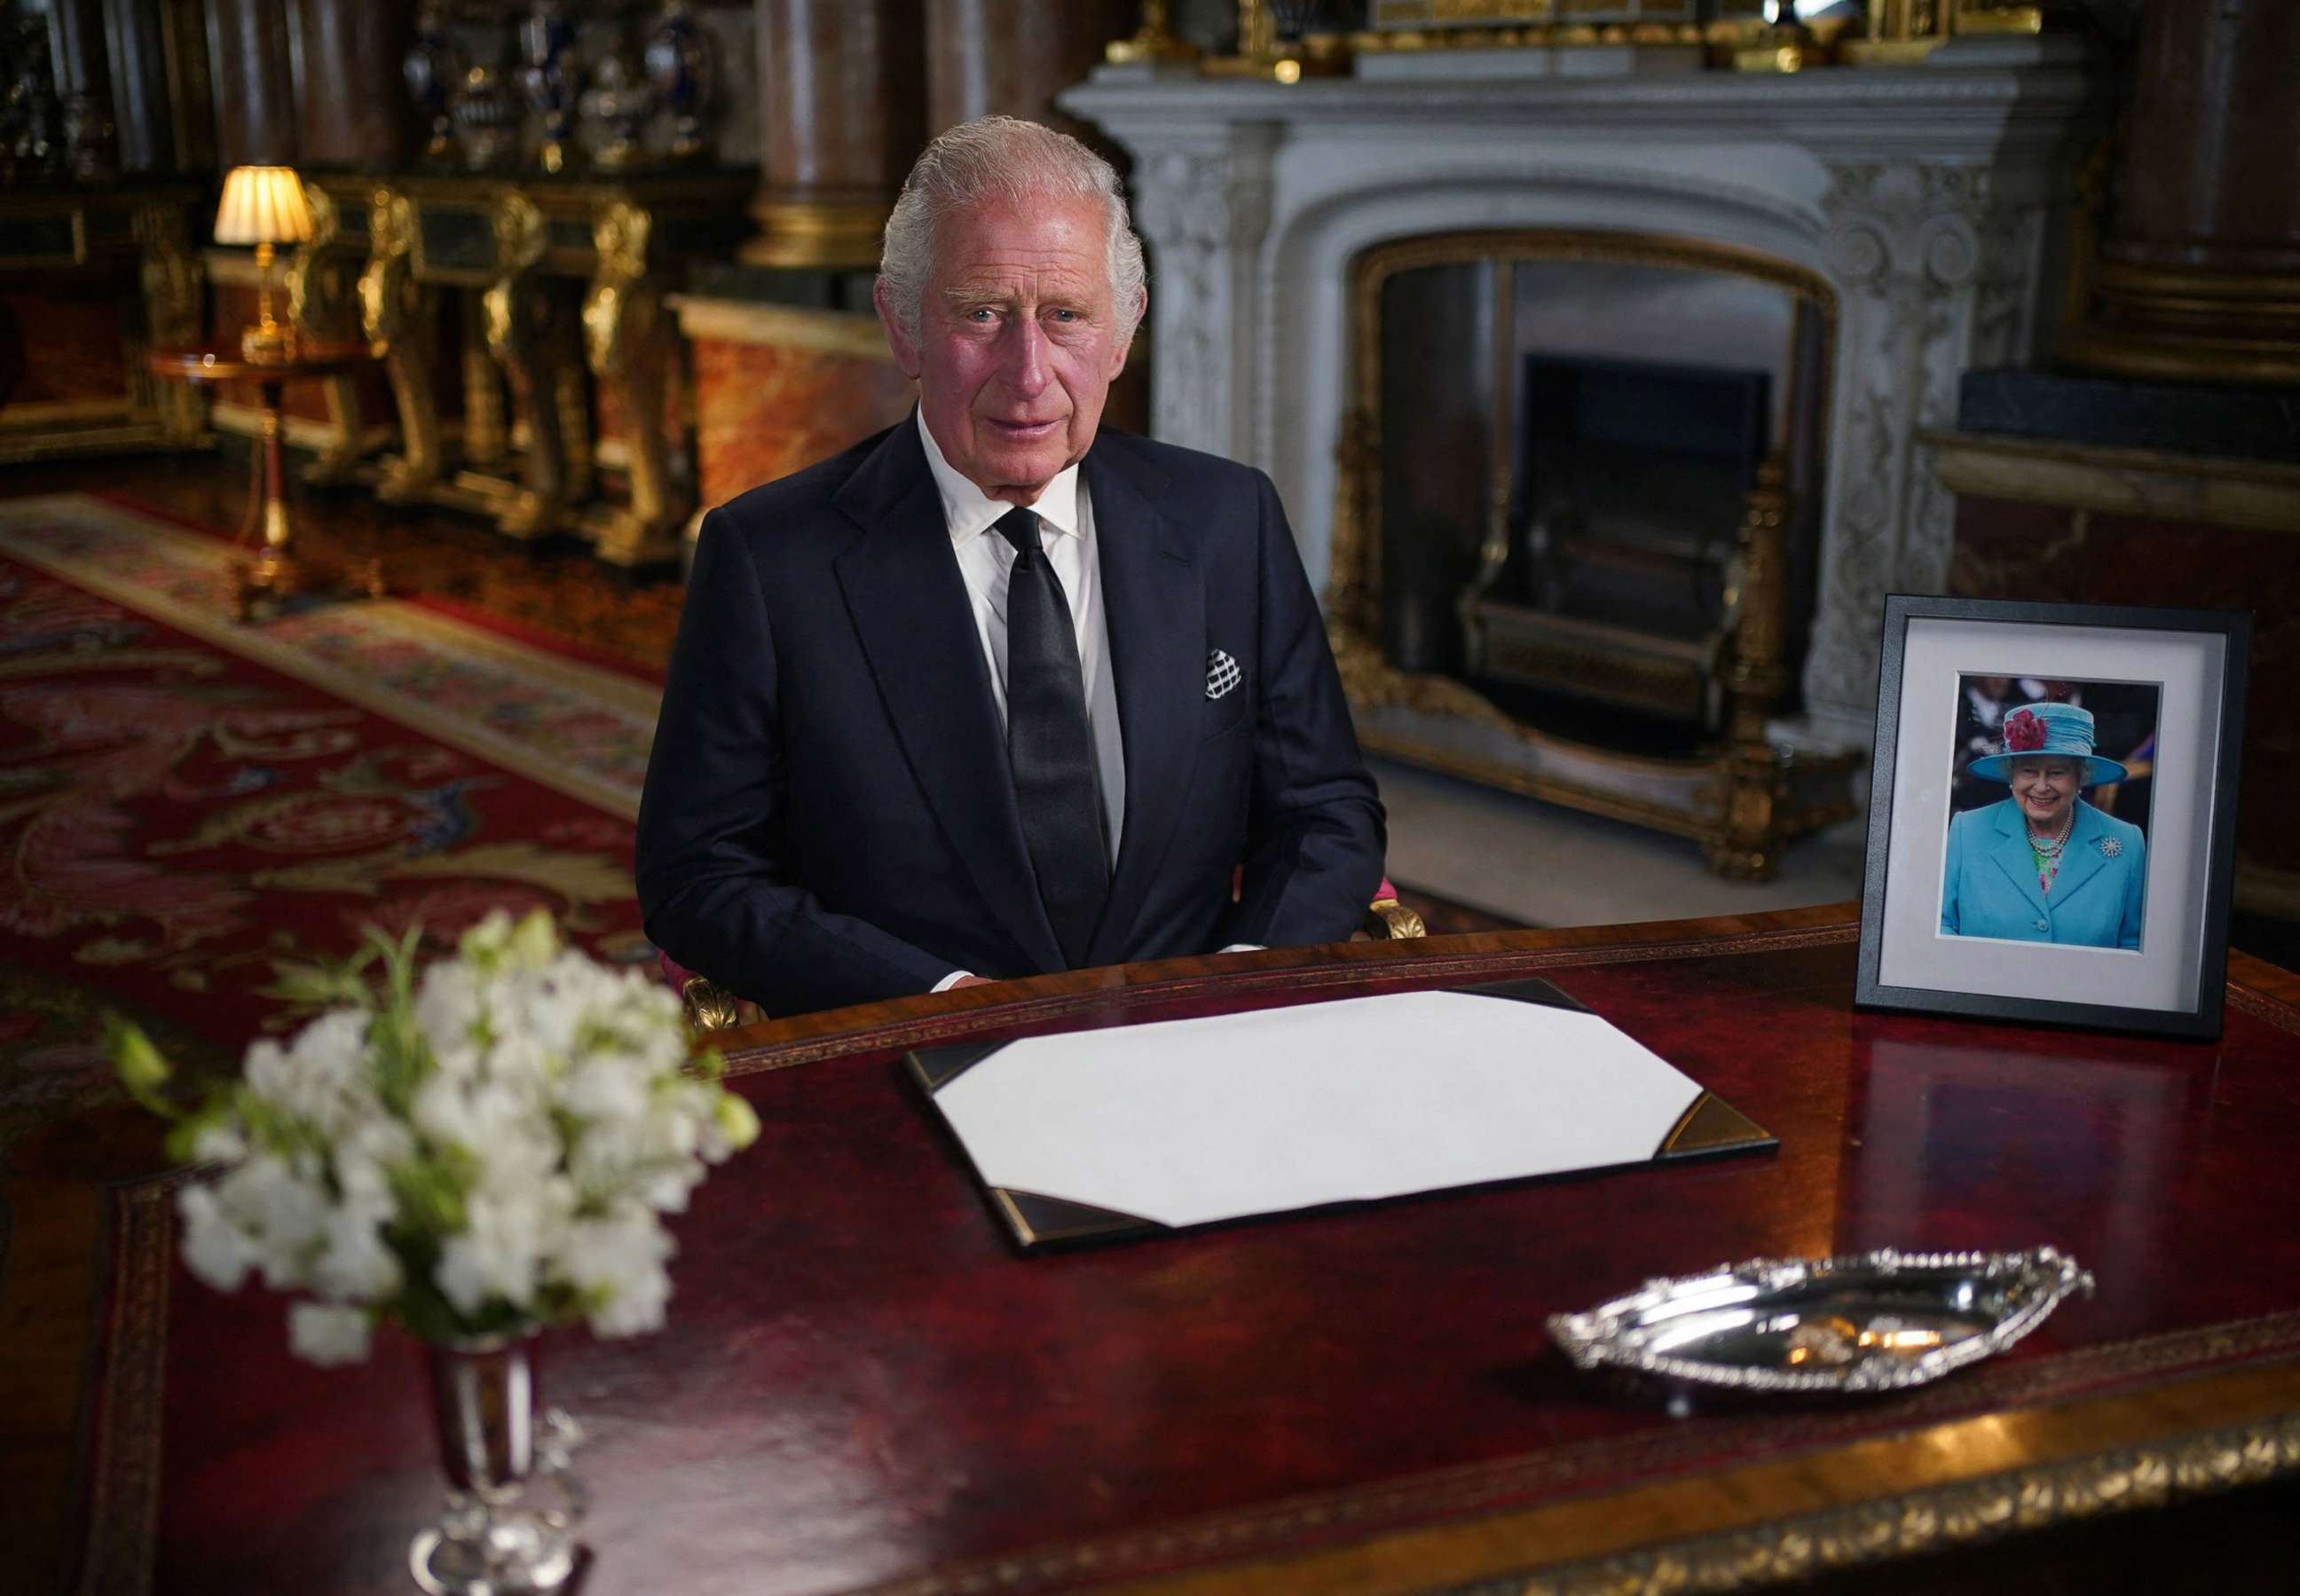 PHOTO: Britain's King Charles III makes a televised address to the Nation and the Commonwealth from the Blue Drawing Room at Buckingham Palace in London on Sept. 9, 2022, a day after Queen Elizabeth II died at the age of 96.